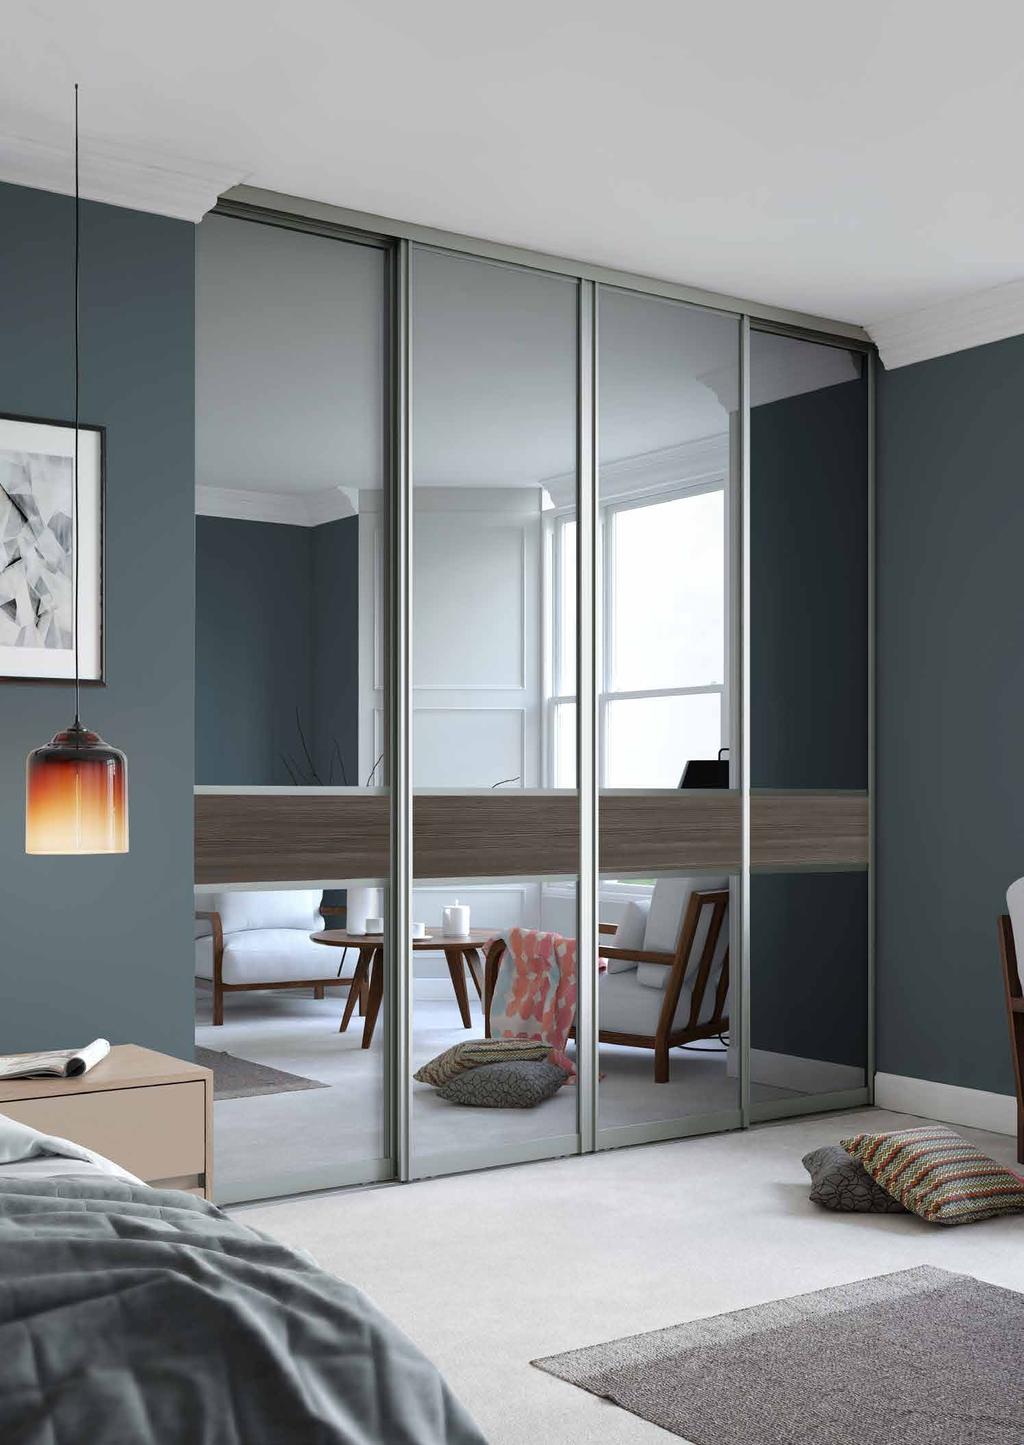 With mirror doors, you can easily get away with darker wall